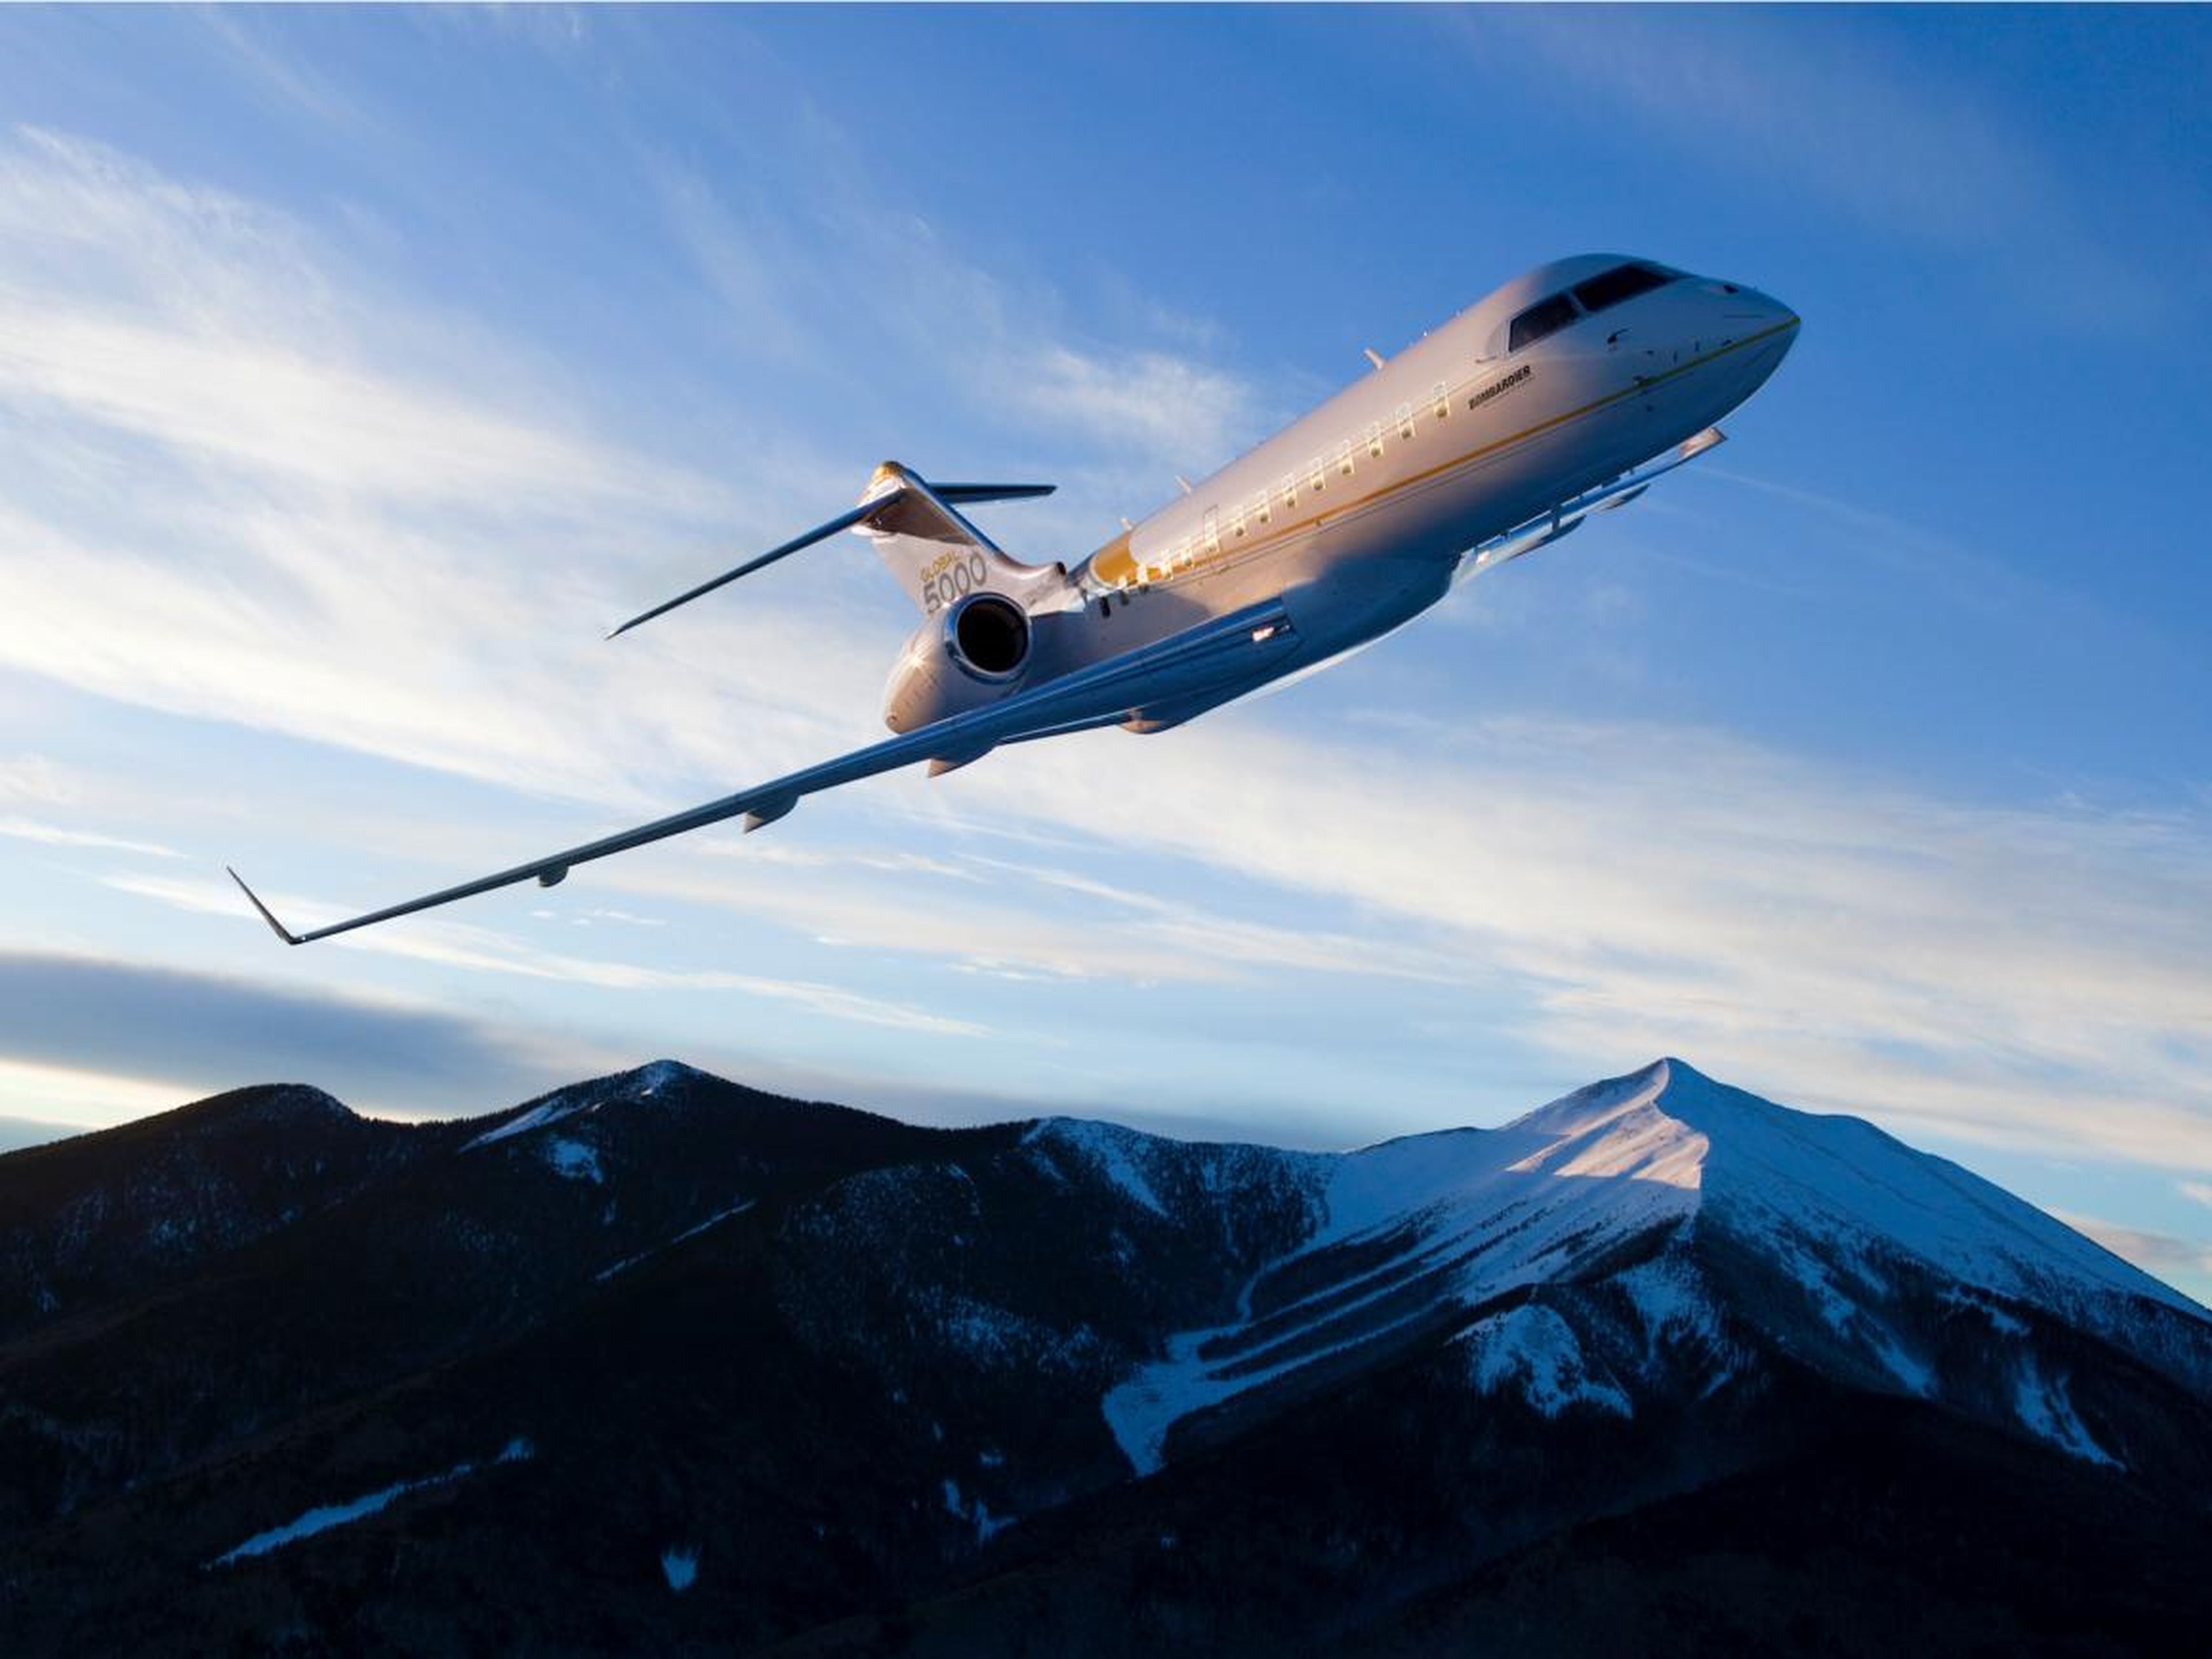 Those include the Bombardier Global 5000, ...